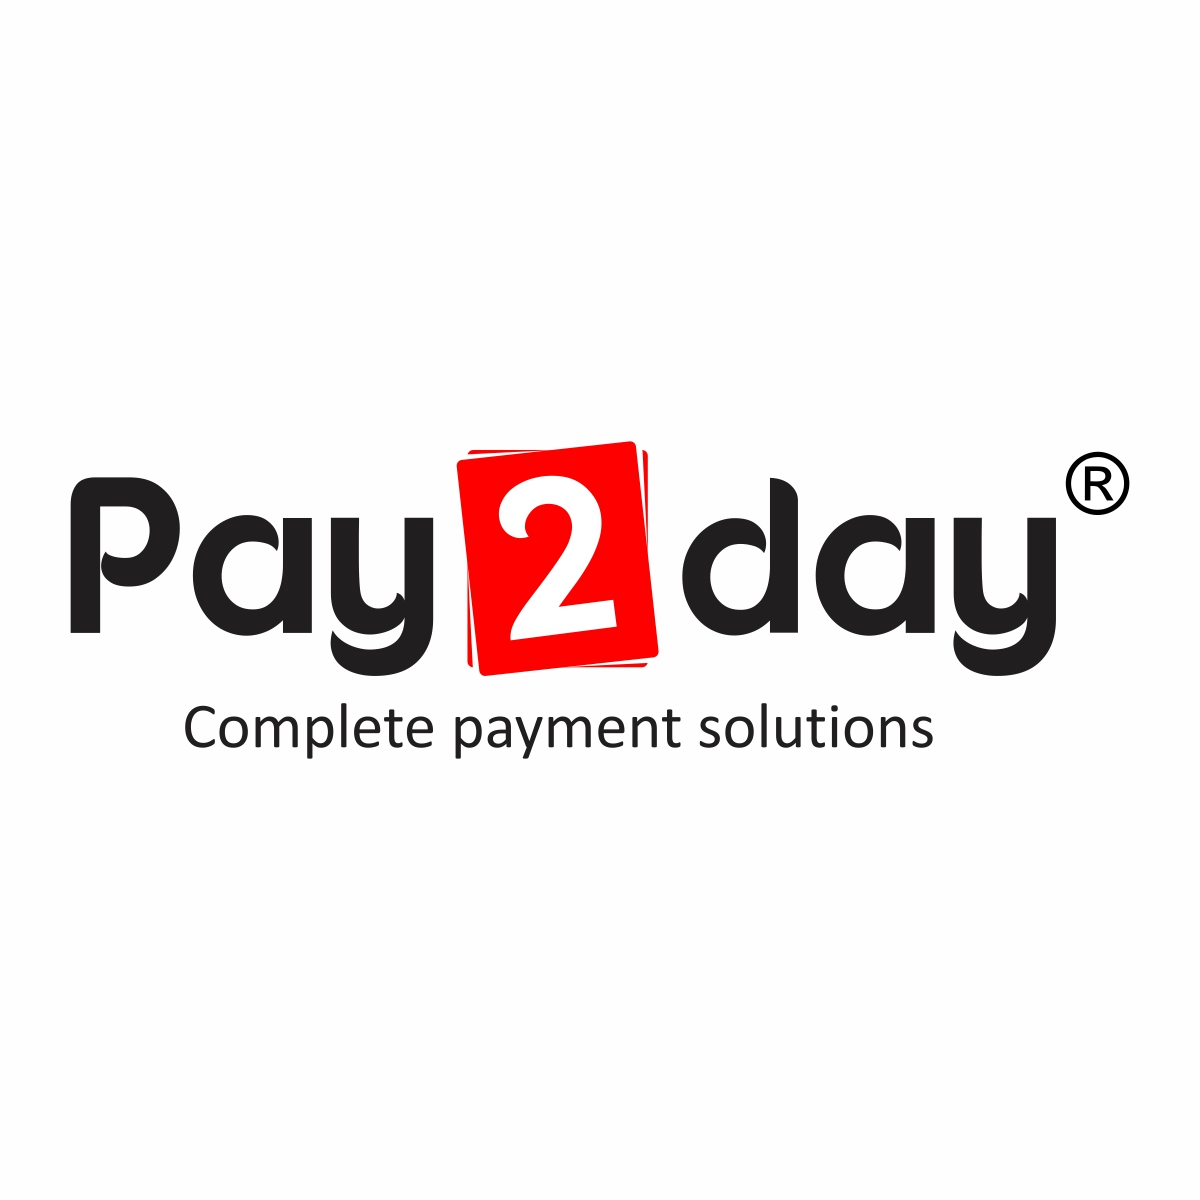 Pay2day Complete Payment Solution logo